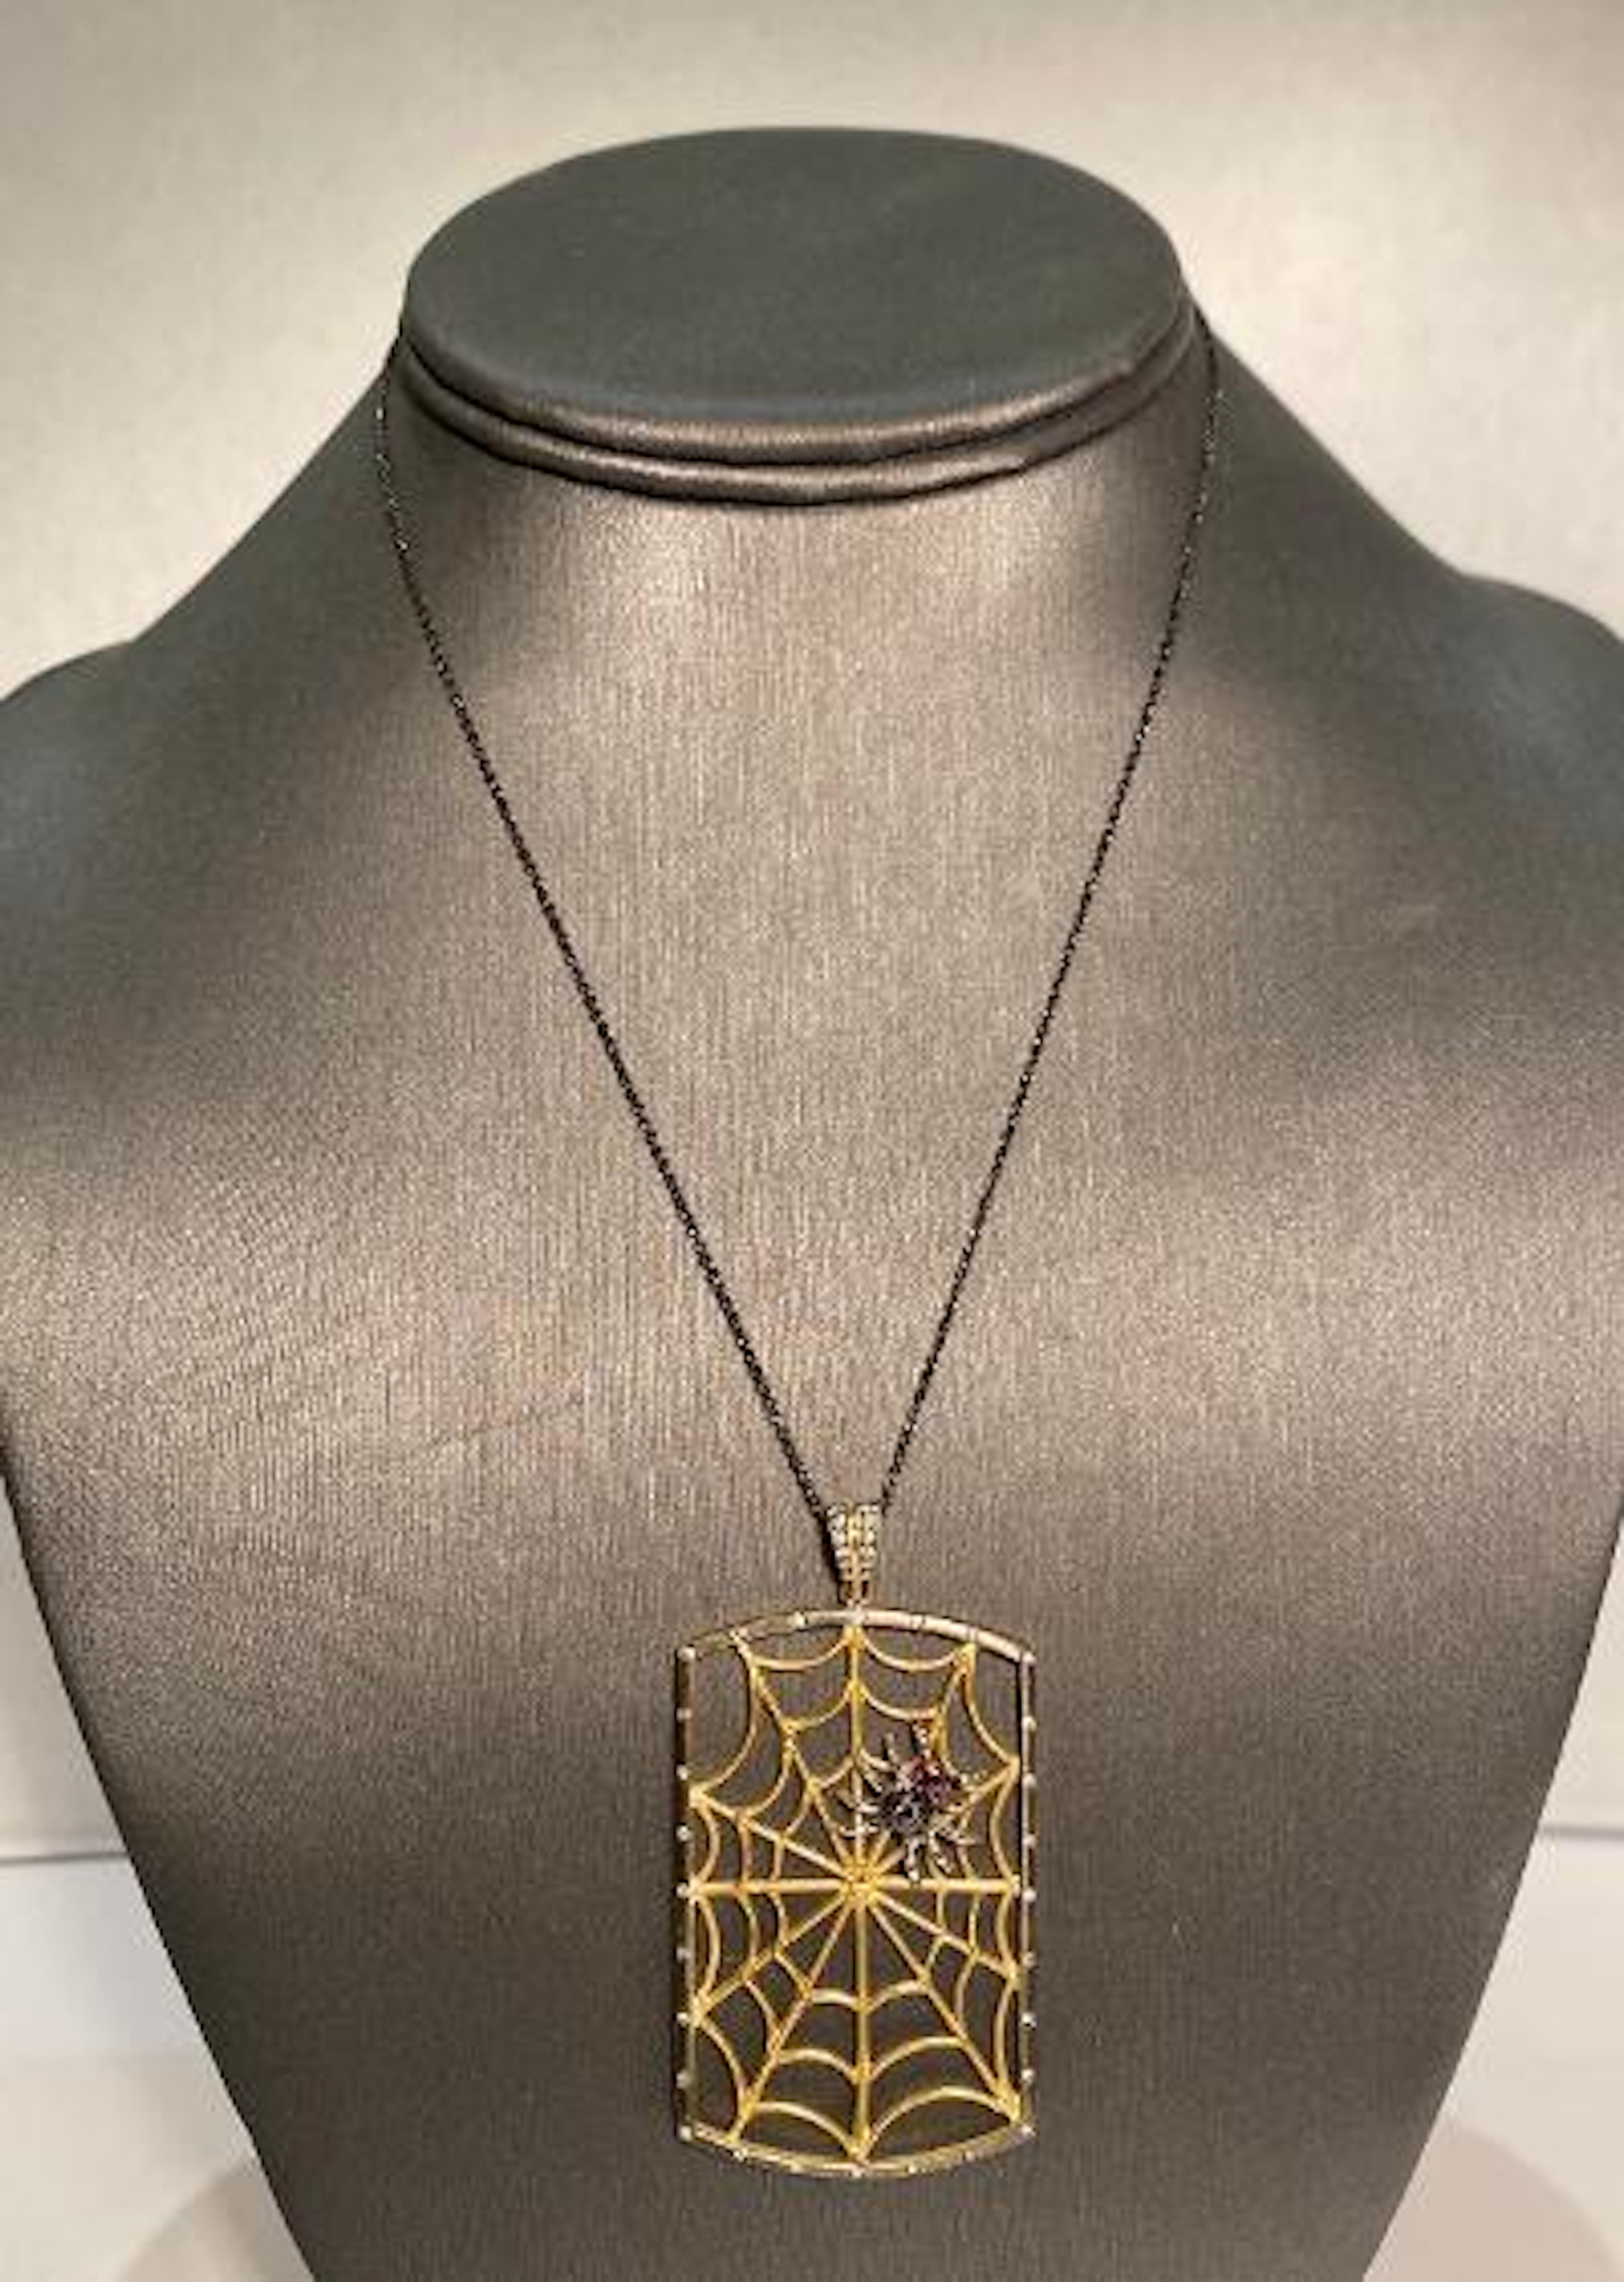 Spooktacular 18 Karat solid tri-color gold custom made large spider web necklace featuring a black diamond spider with white gold legs and ruby eyes climbing on the web.  The web is satin finish yellow gold. Surrounding the web are 28 small round